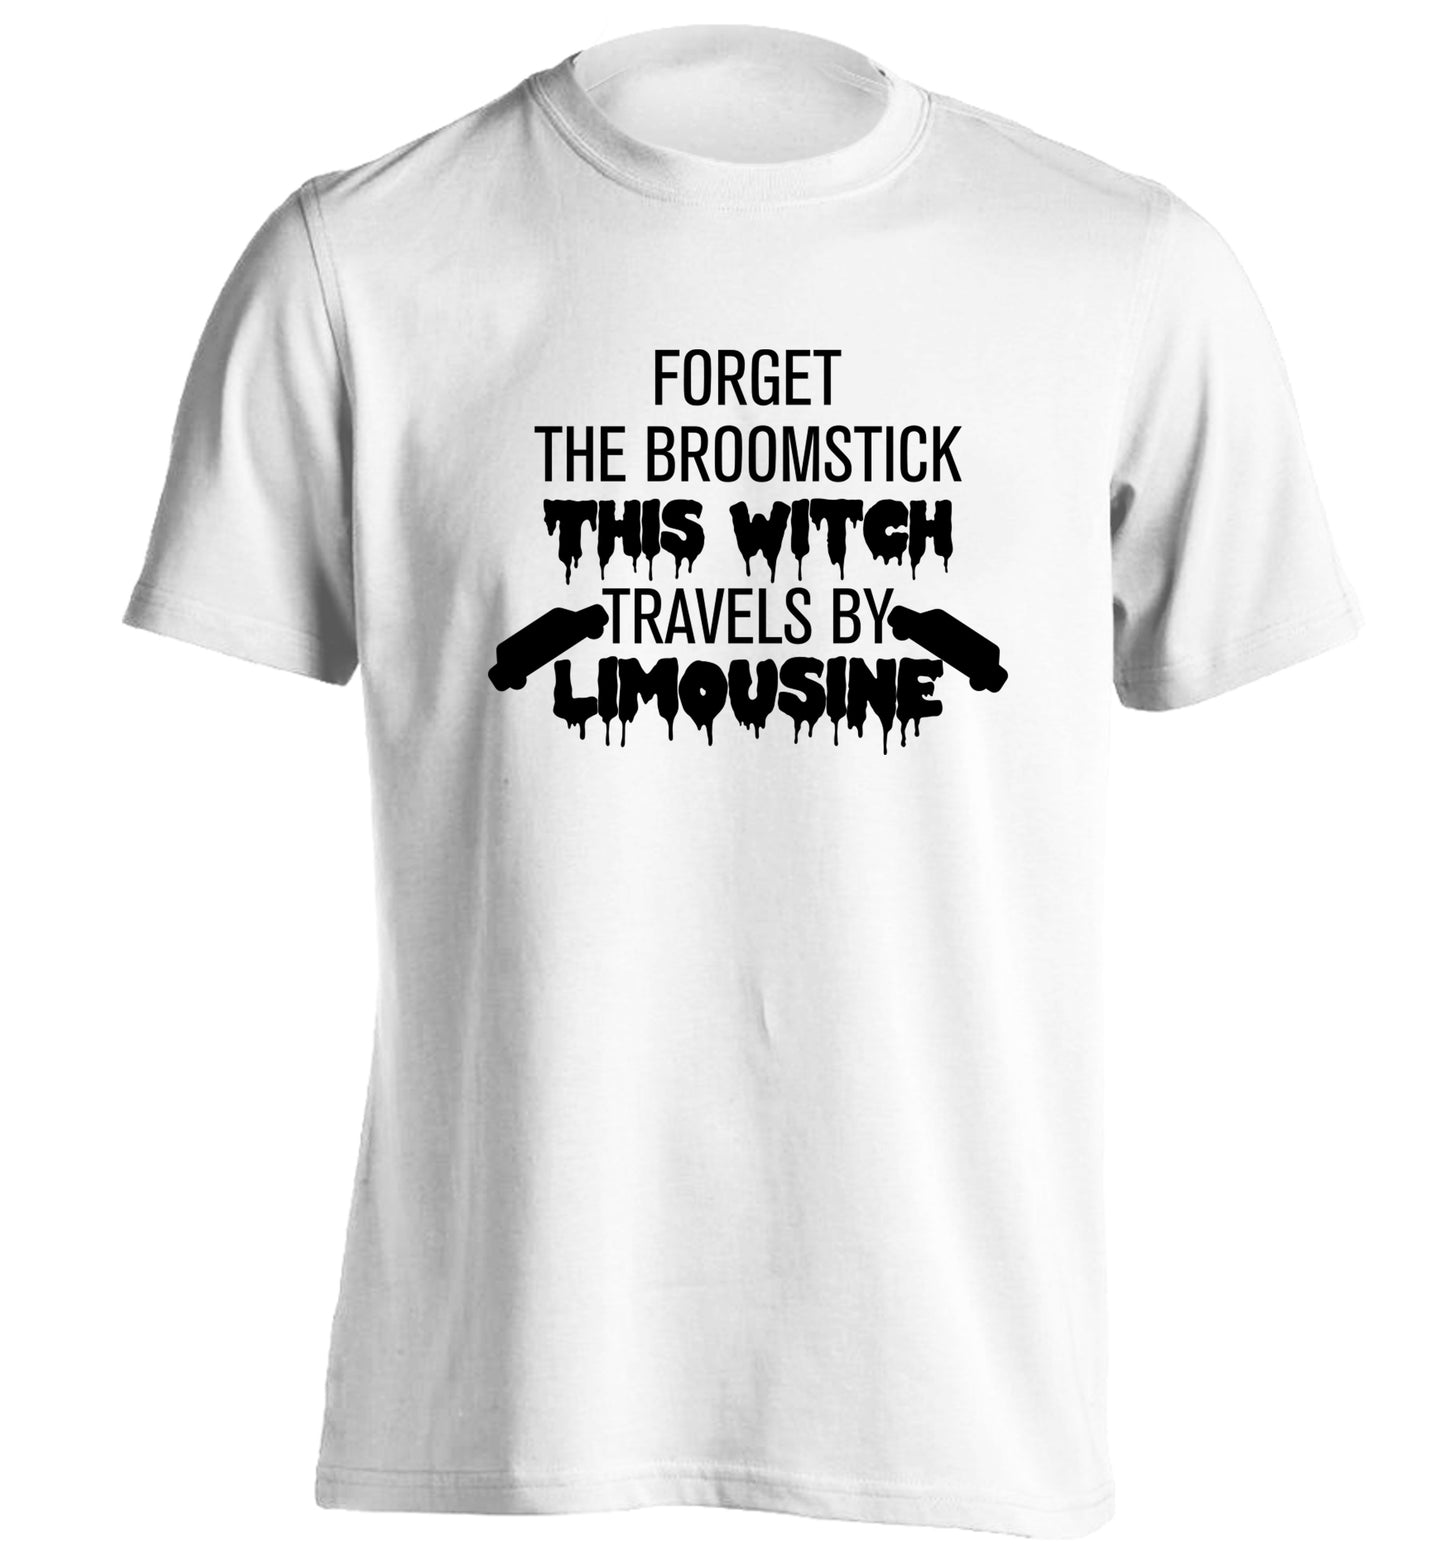 Forget the broomstick this witch travels by limousine adults unisexwhite Tshirt 2XL